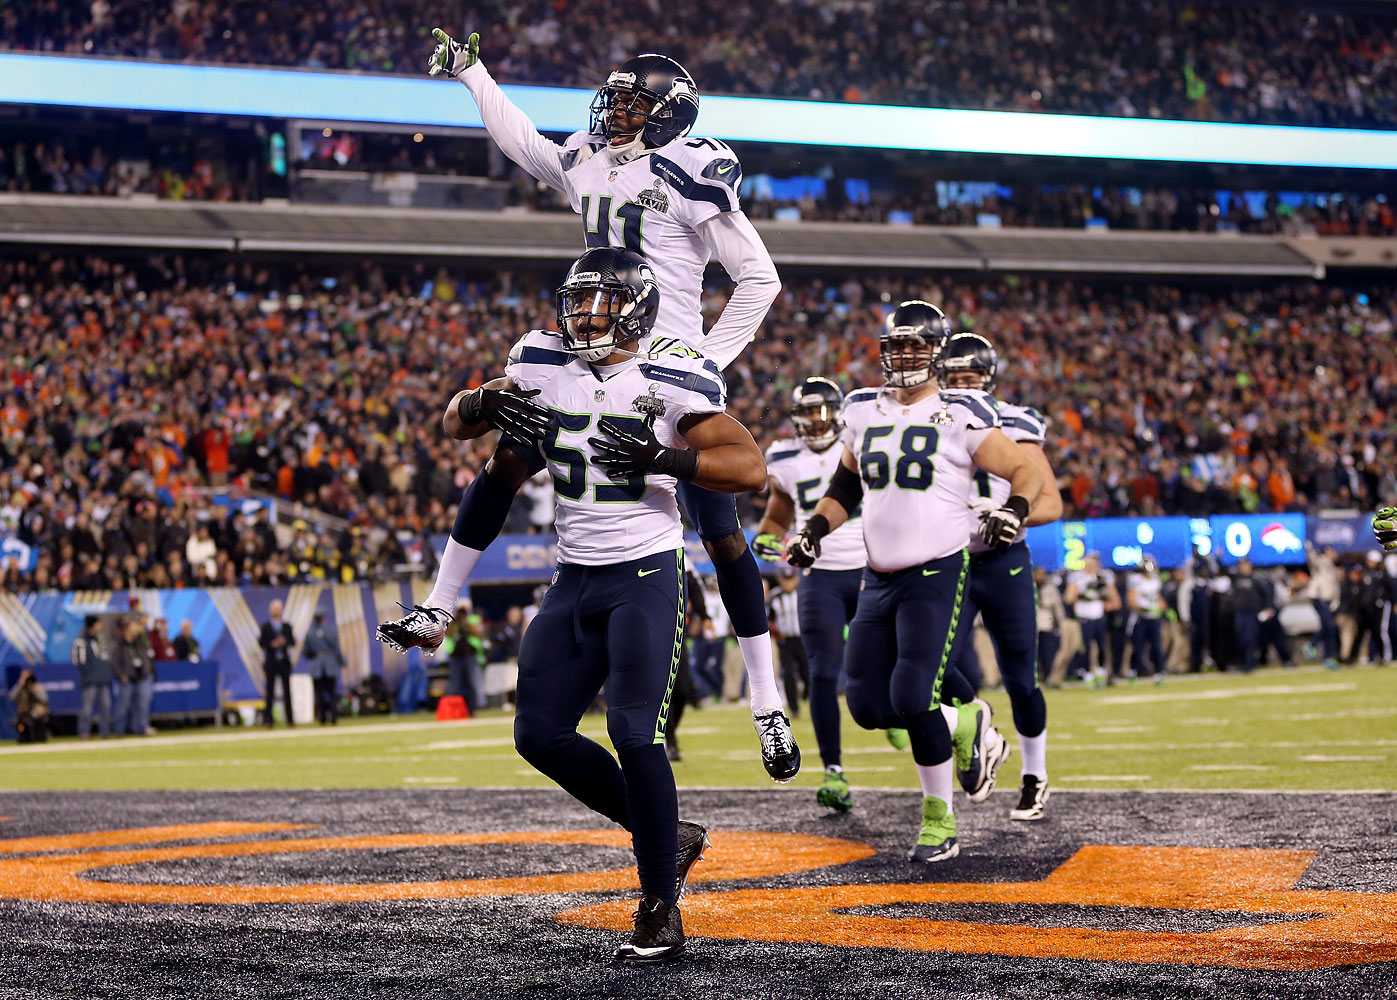 Outside linebacker Malcolm Smith #53 of the Seattle Seahawks celebrates his 69-yard touchdown with teammates after intercepting a pass thrown by quarterback Peyton Manning #18 of the Denver Broncos intended for running back Knowshon Moreno #27 in the second quarter during Super Bowl XLVIII at MetLife Stadium on Feb. 2, 2014 in East Rutherford, N.J. (Jeff Gross / Getty Images)